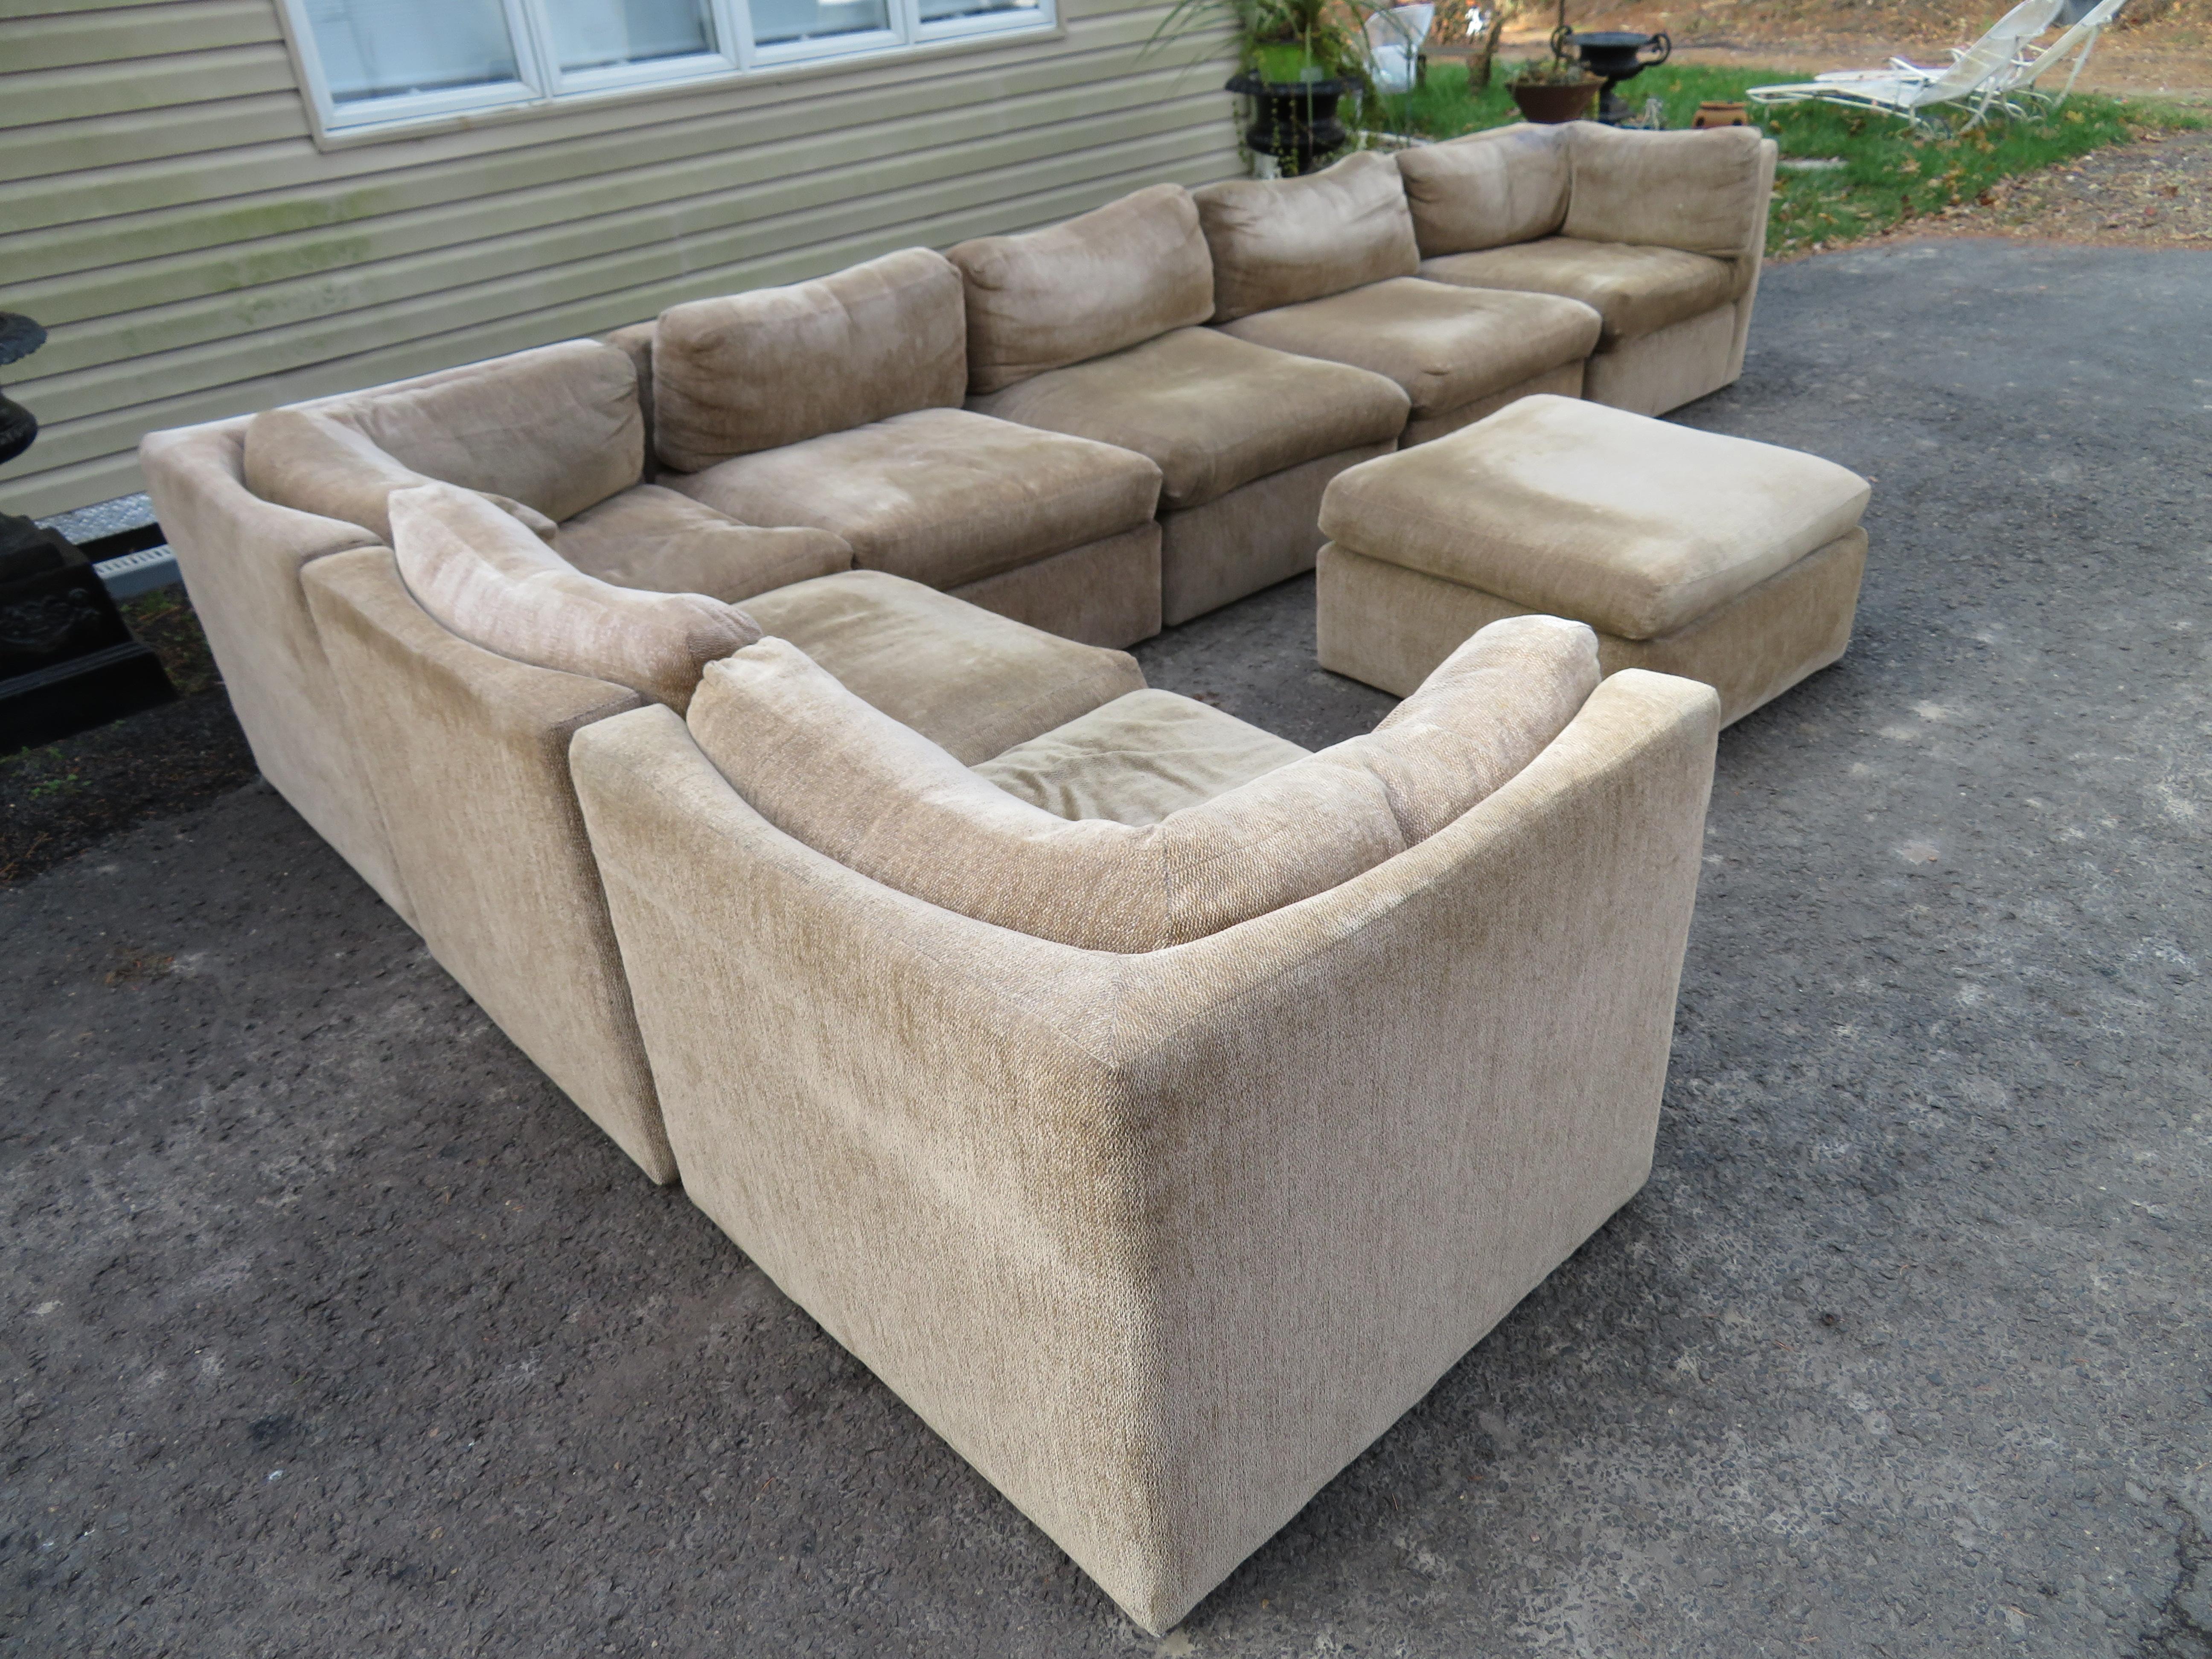 Wonderful Milo Baughman 8-piece sectional sofa with unusual curved seat backs. This sofa looks as though it was reupholstered maybe 10-15 years ago and the fabric still looks good-some minor spots. This sectional consists of 3 corners, 4 armless